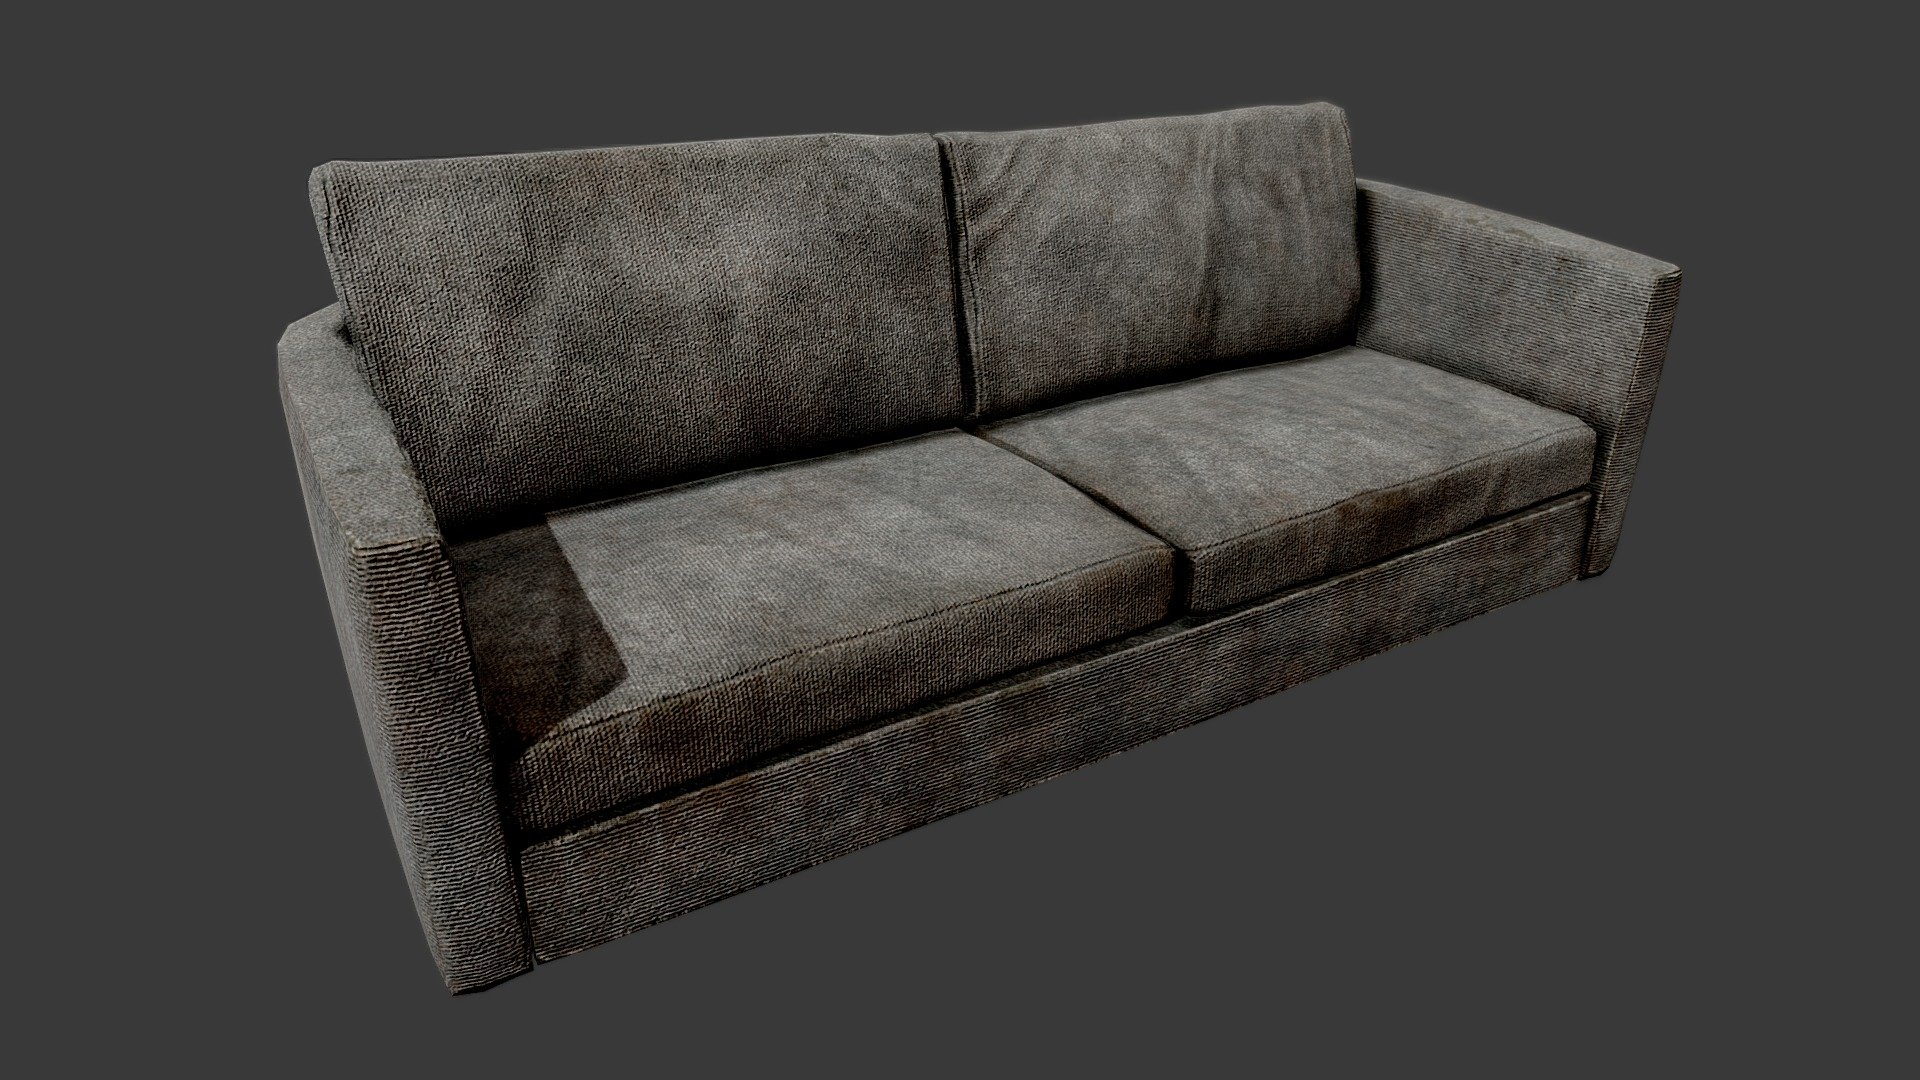 Old Dirty Couch 02 Dark Grey - PBR

Very Detailed Low Poly Dark Grey Old Cotton Couch / Sofa with High-Quality PBR Textures.

Fits perfect for any PBR game as Decoration etc. like Post Apocalyptic Environment or Horror Games for example

Created with 3DSMAX, Zbrush and Substance Painter.

Standard Textures
Base Color, Metallic, Roughness, Height, AO, Normal, Maps

Unreal 4 Textures
Base Color, Normal, OcclusionRoughnessMetallic

Unity 5/2017 Textures
Albedo, SpecularSmoothness, Normal, and AO Maps

2 x 4096x4096 TGA Textures

Please Note, this PBR Textures Only. 

Low Poly Triangles 

3778 Tris
1901 Verts

File Formats :

.Max2018
.Max2017
.Max2016
.Max2015
.FBX
.OBJ
.3DS
.DAE - Old Dirty Couch 02 Dark Grey - PBR - Buy Royalty Free 3D model by GamePoly (@triix3d) 3d model